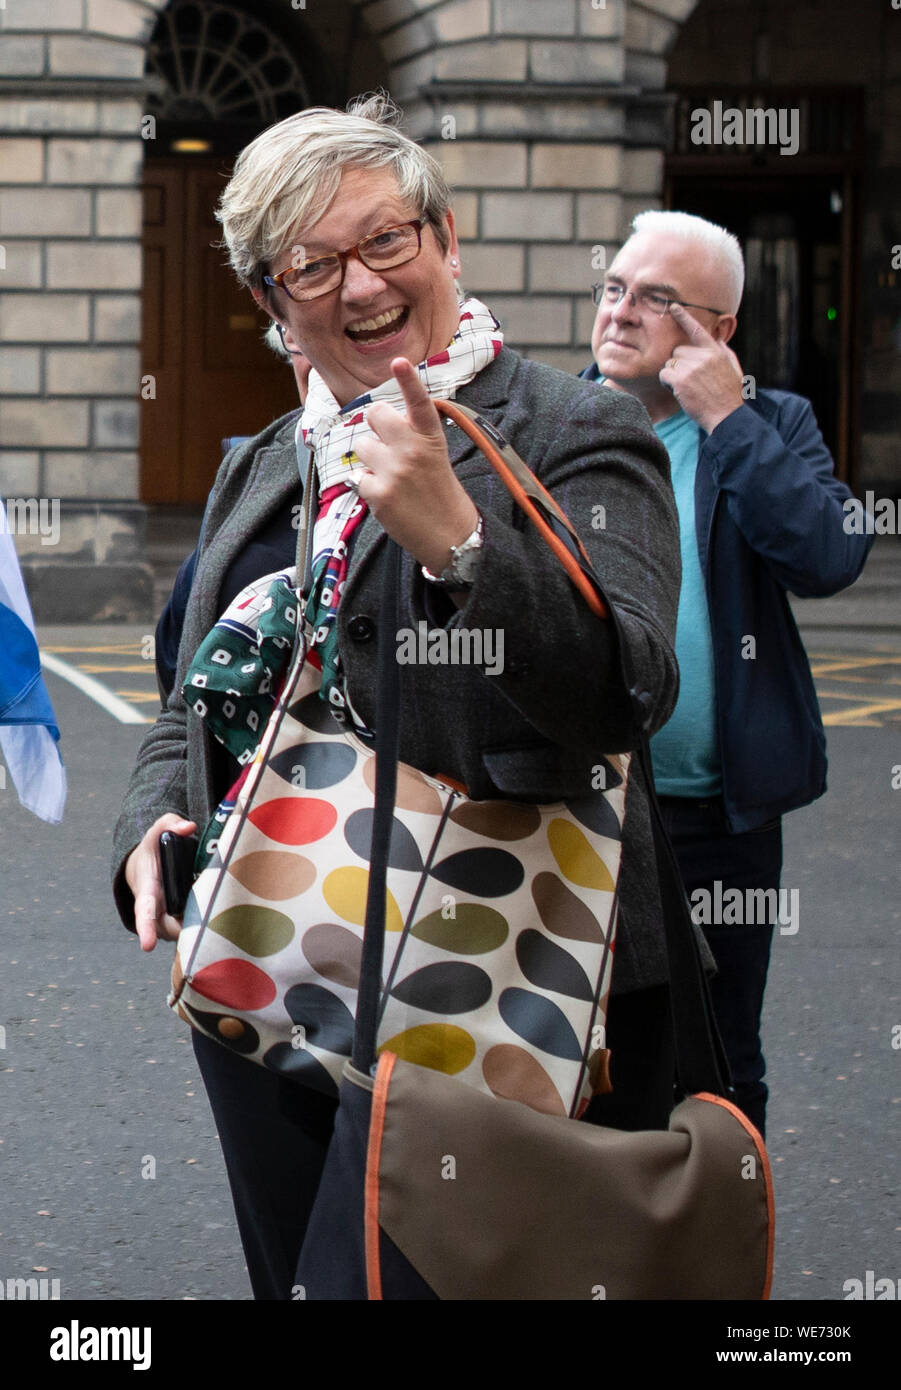 SNP MP Joanna Cherry outside the Court of Session in Edinburgh where parliamentarians were seeking an interim interdict through the Scottish legal system that would prevent the UK Parliament being suspended. Their request was declined by Lord Doherty who said he was not satisfied there was a 'cogent need' for an interdict. Stock Photo